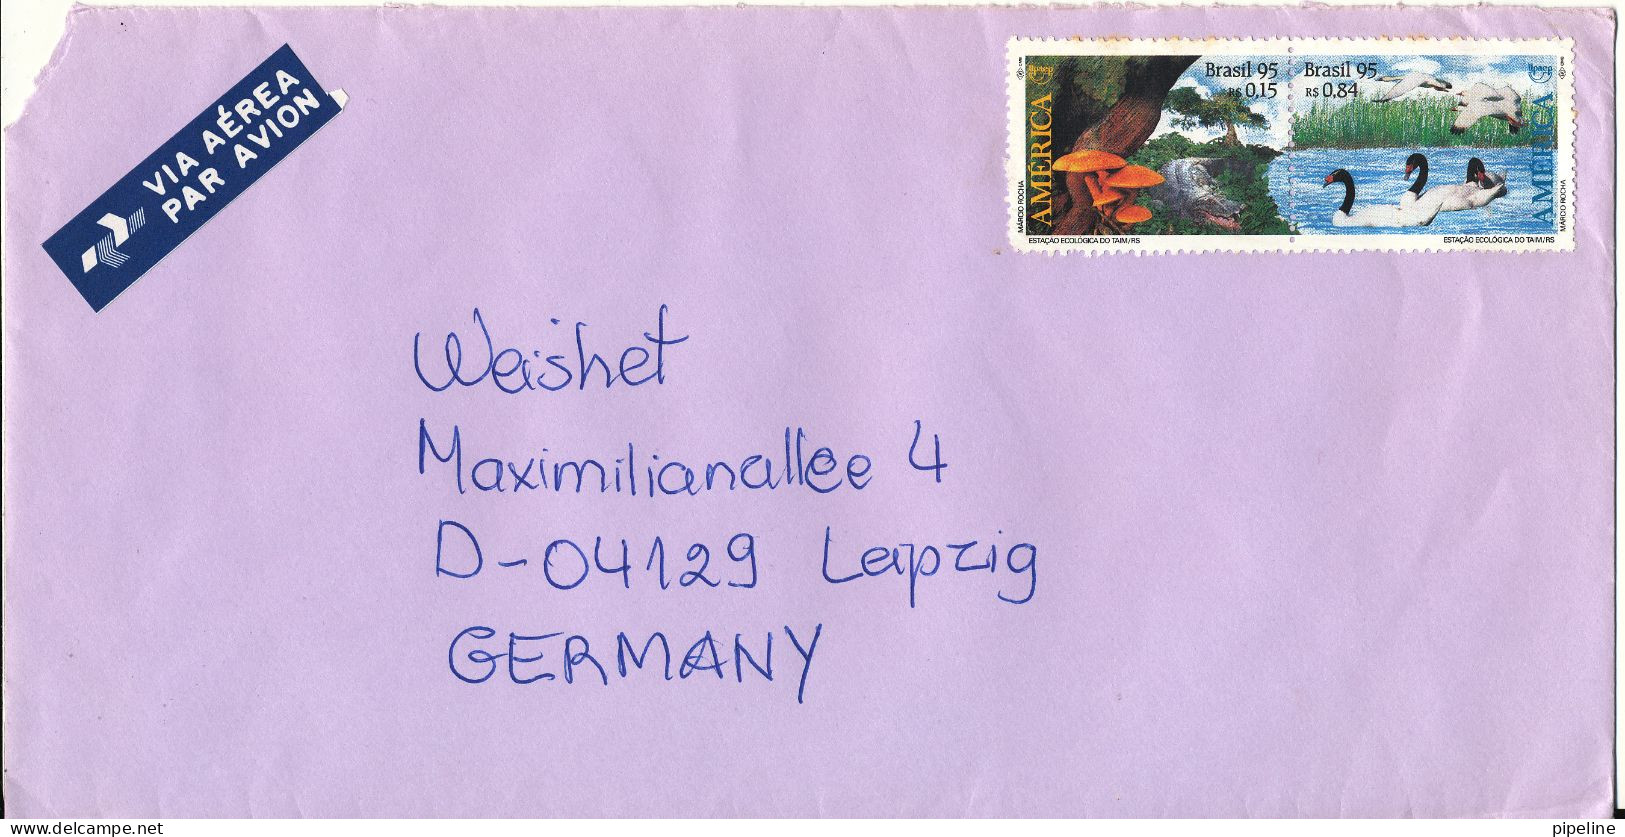 Brazil Cover Sent Air Mail To Germany No Postmark On Stamps Or Cover - Airmail